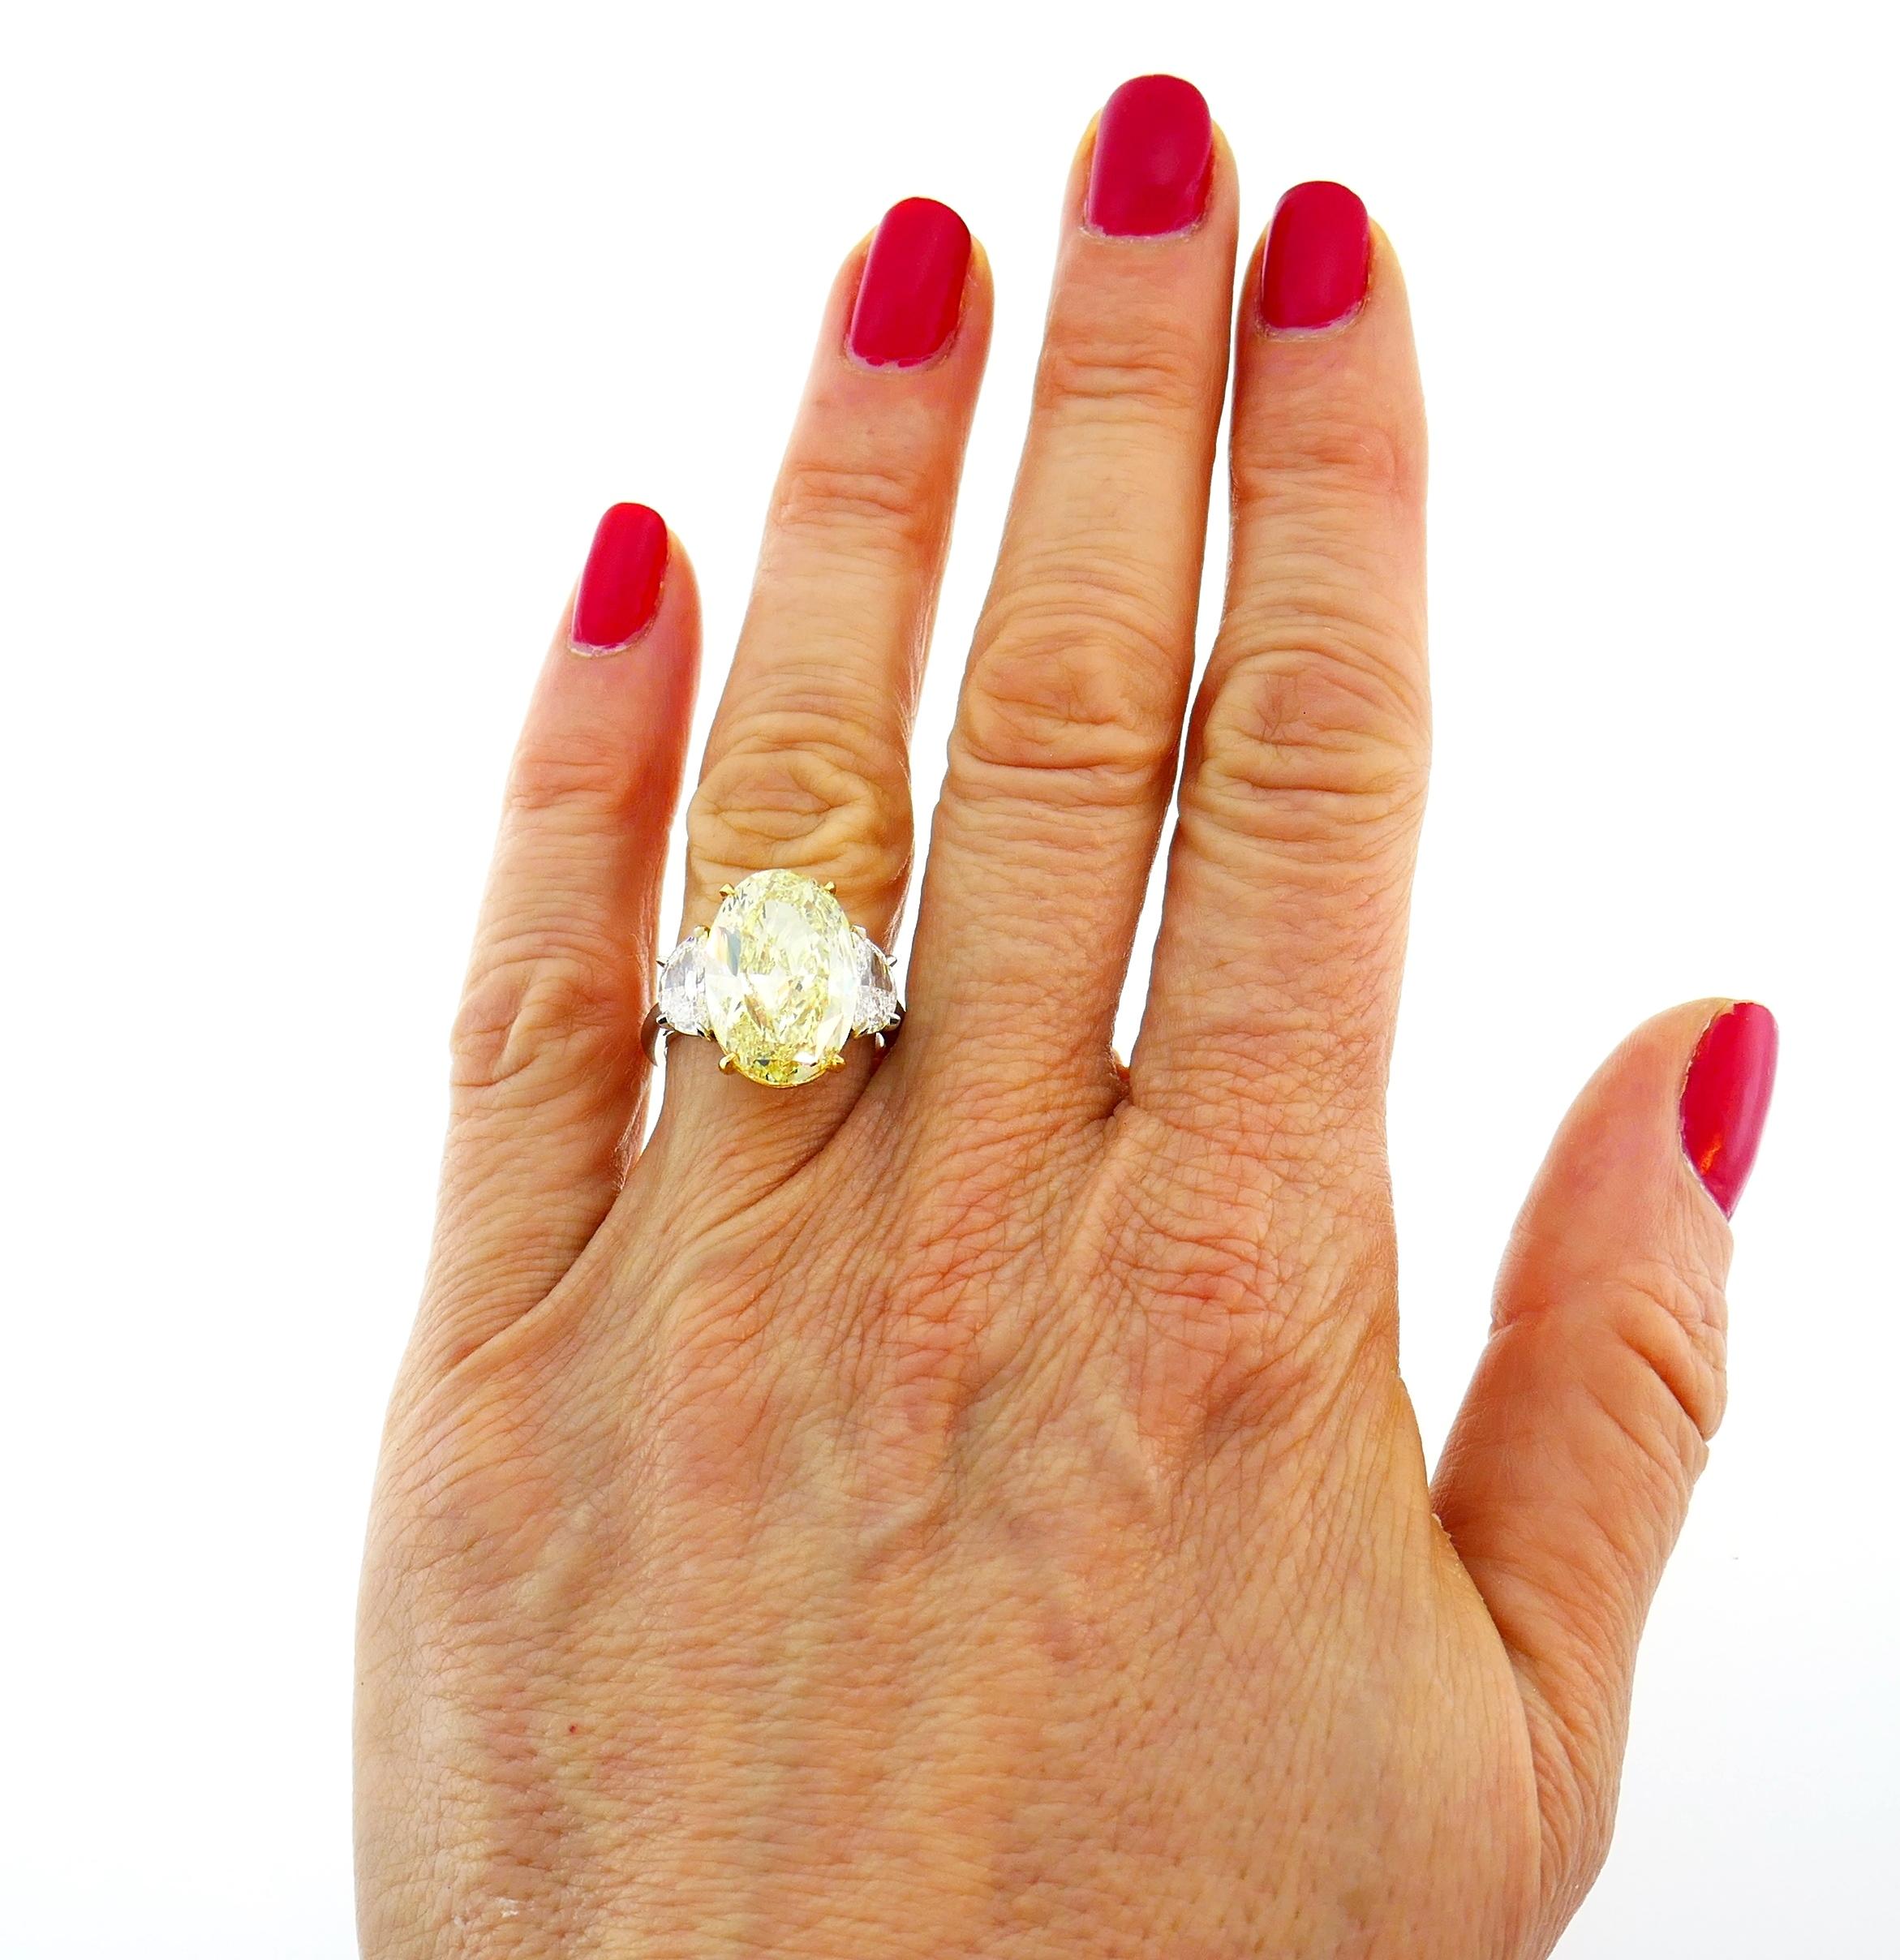 Magnificent and classy yellow diamond solitaire ring! Features a 8.47-carat natural fancy yellow oval brilliant cut diamond flanked by two half-moon cut white diamonds. The fancy yellow diamond comes with a GIA Colored Diamond Grading Report stating